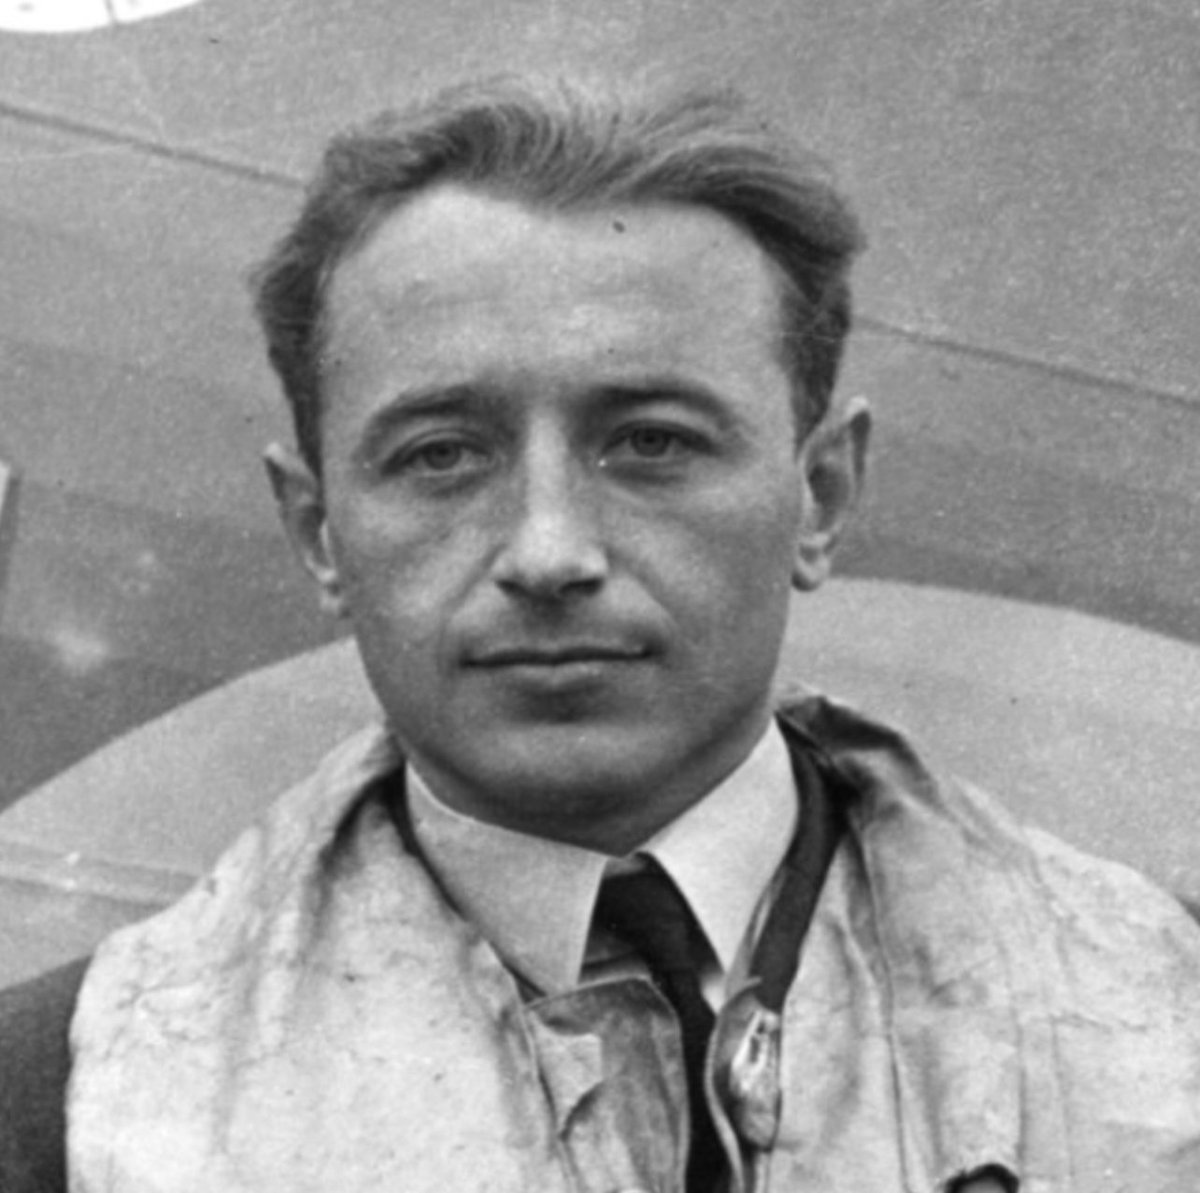 F/O Marian Pisarek, a Polish fighter ace, flew with the Polish🇵🇱303 Squadron during the #BattleOfBritain. The Squadron became the most successful Fighter Command unit in the Battle. The Poles shot down 126 German planes in only 42 days.
Pisarek was killed #OTD in 1942, leading…